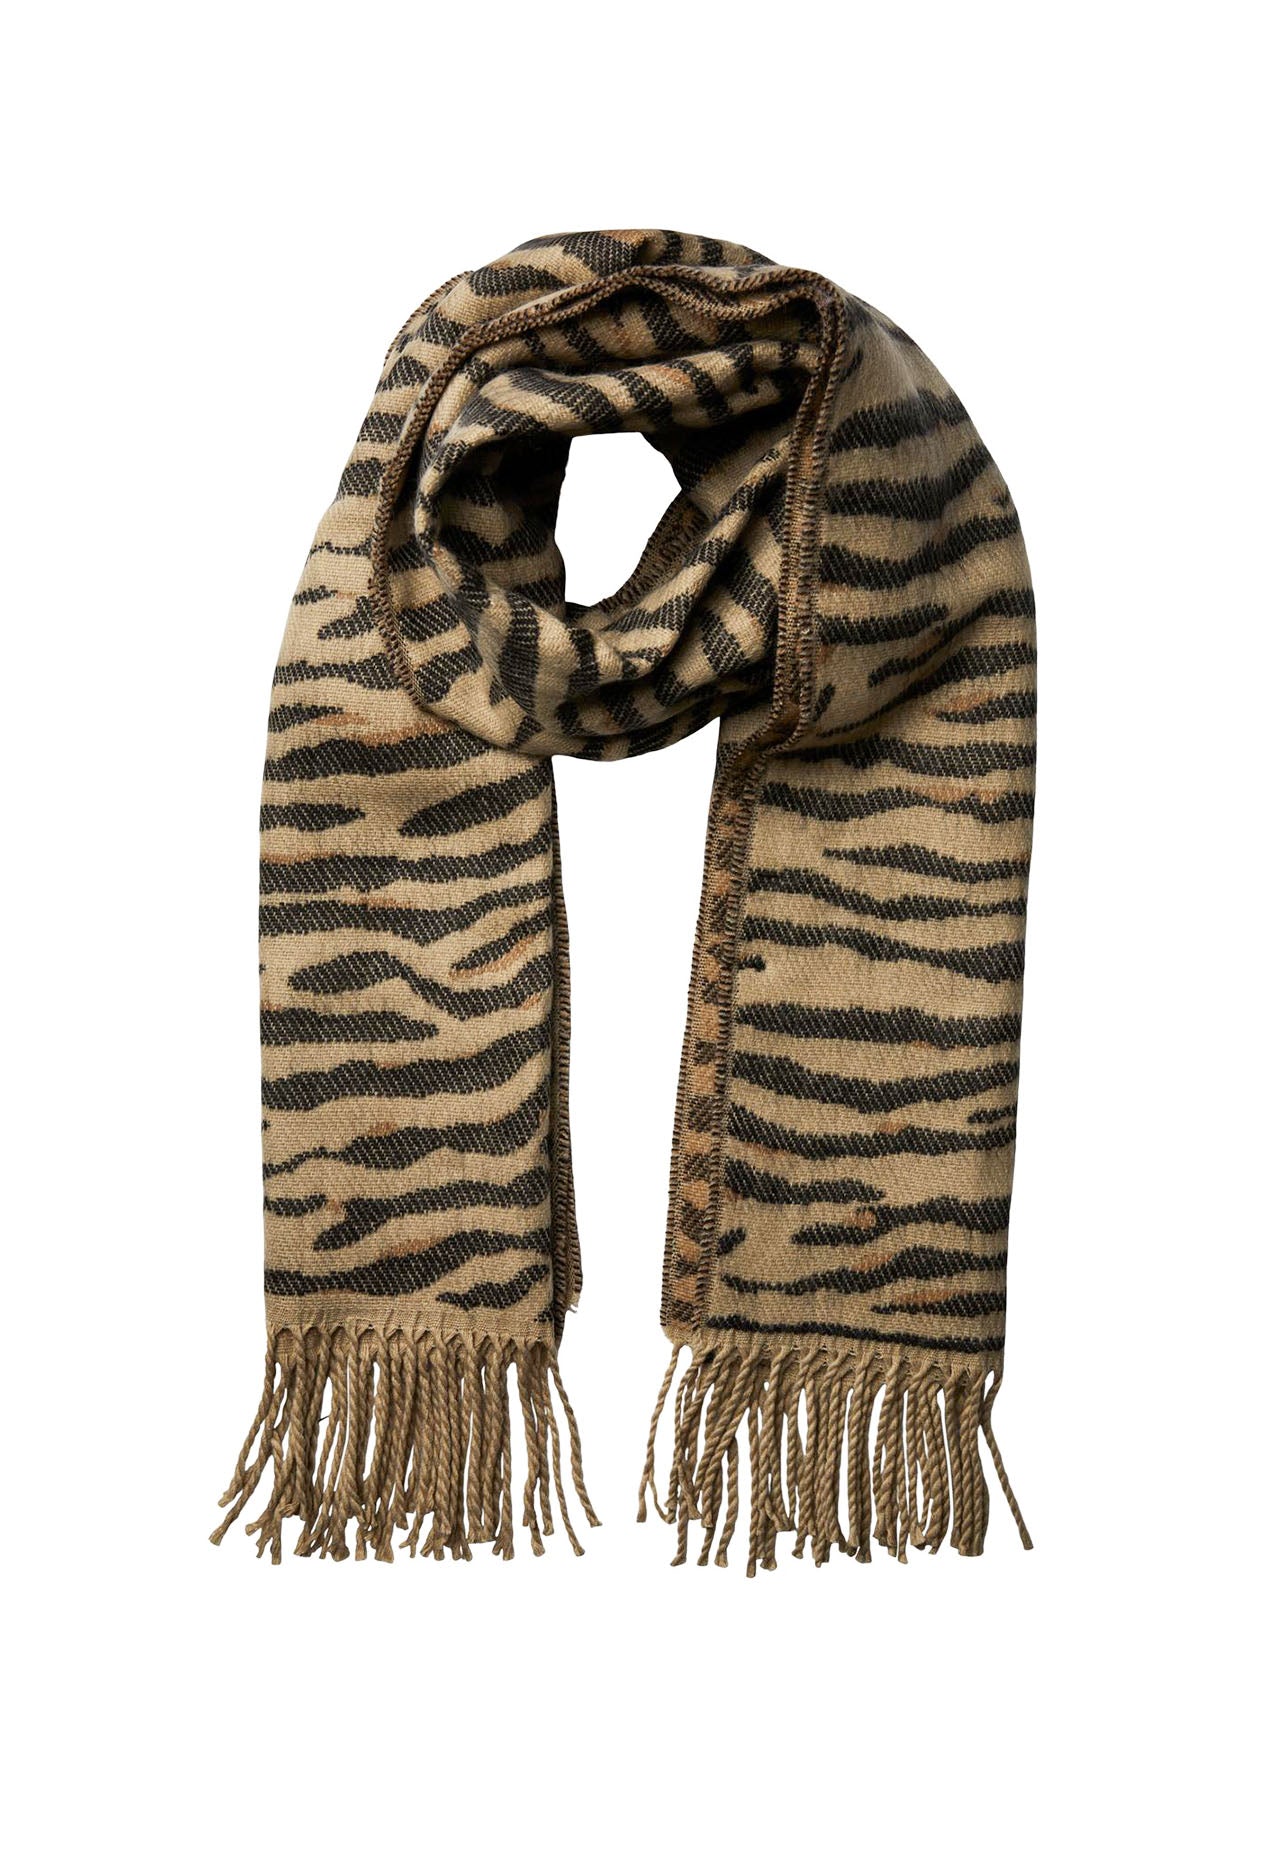 PIECES Zebra Print Oversized Brushed Scarf with Tassels in Beige & Black - One Nation Clothing